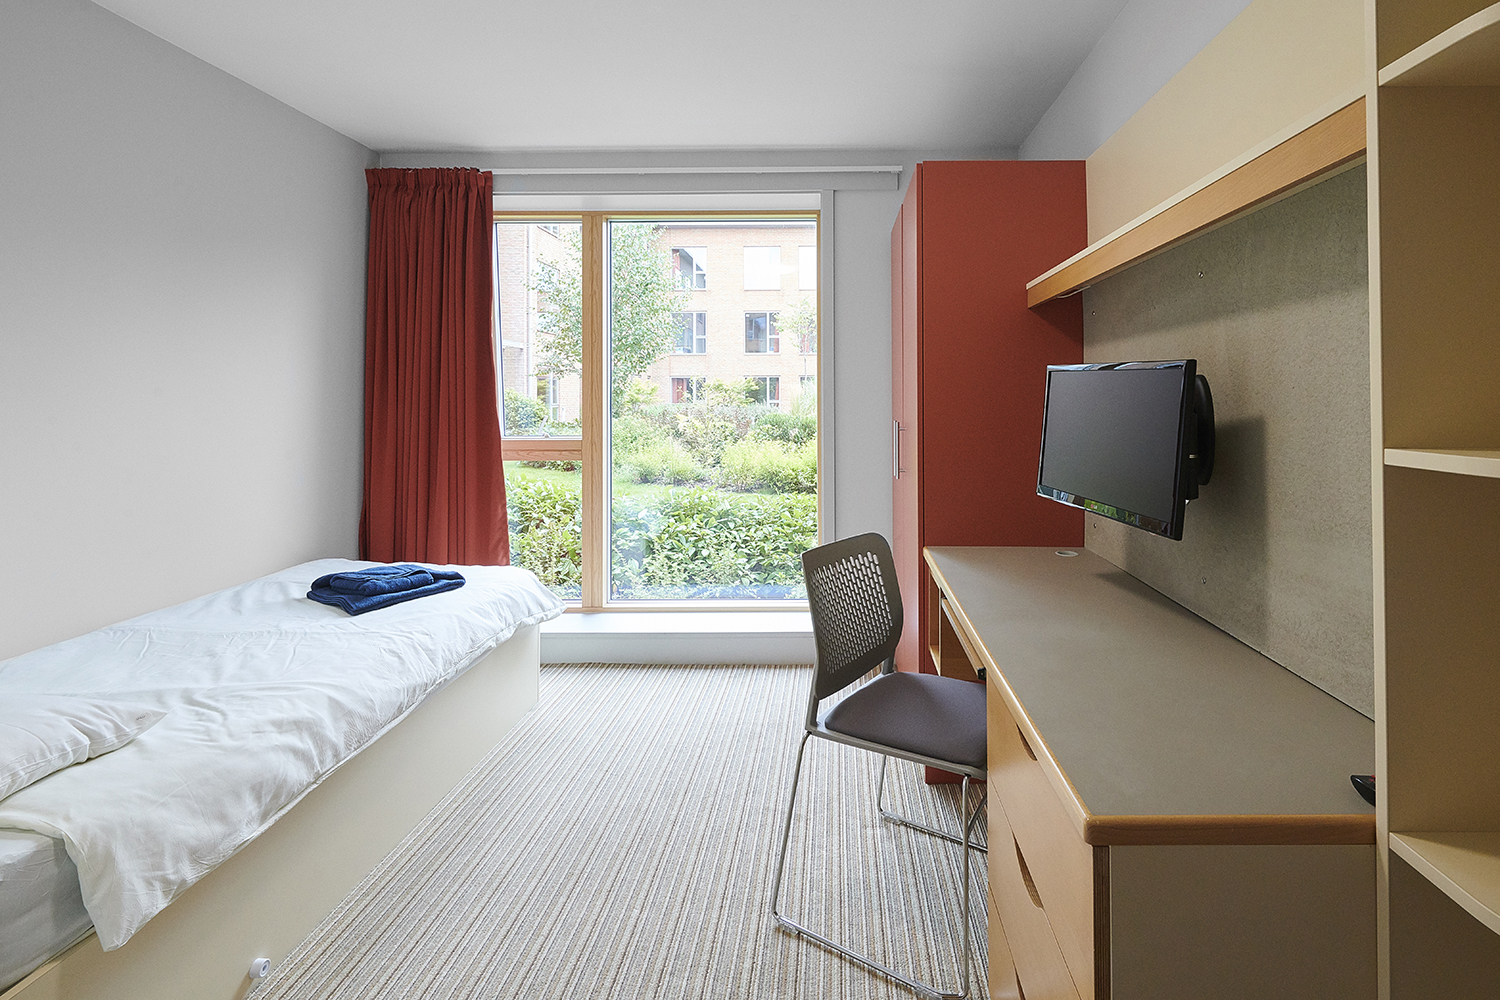 A bedroom furnished with a bed, desk, wardrobe, shelves and storage in a Founders hall of residence.